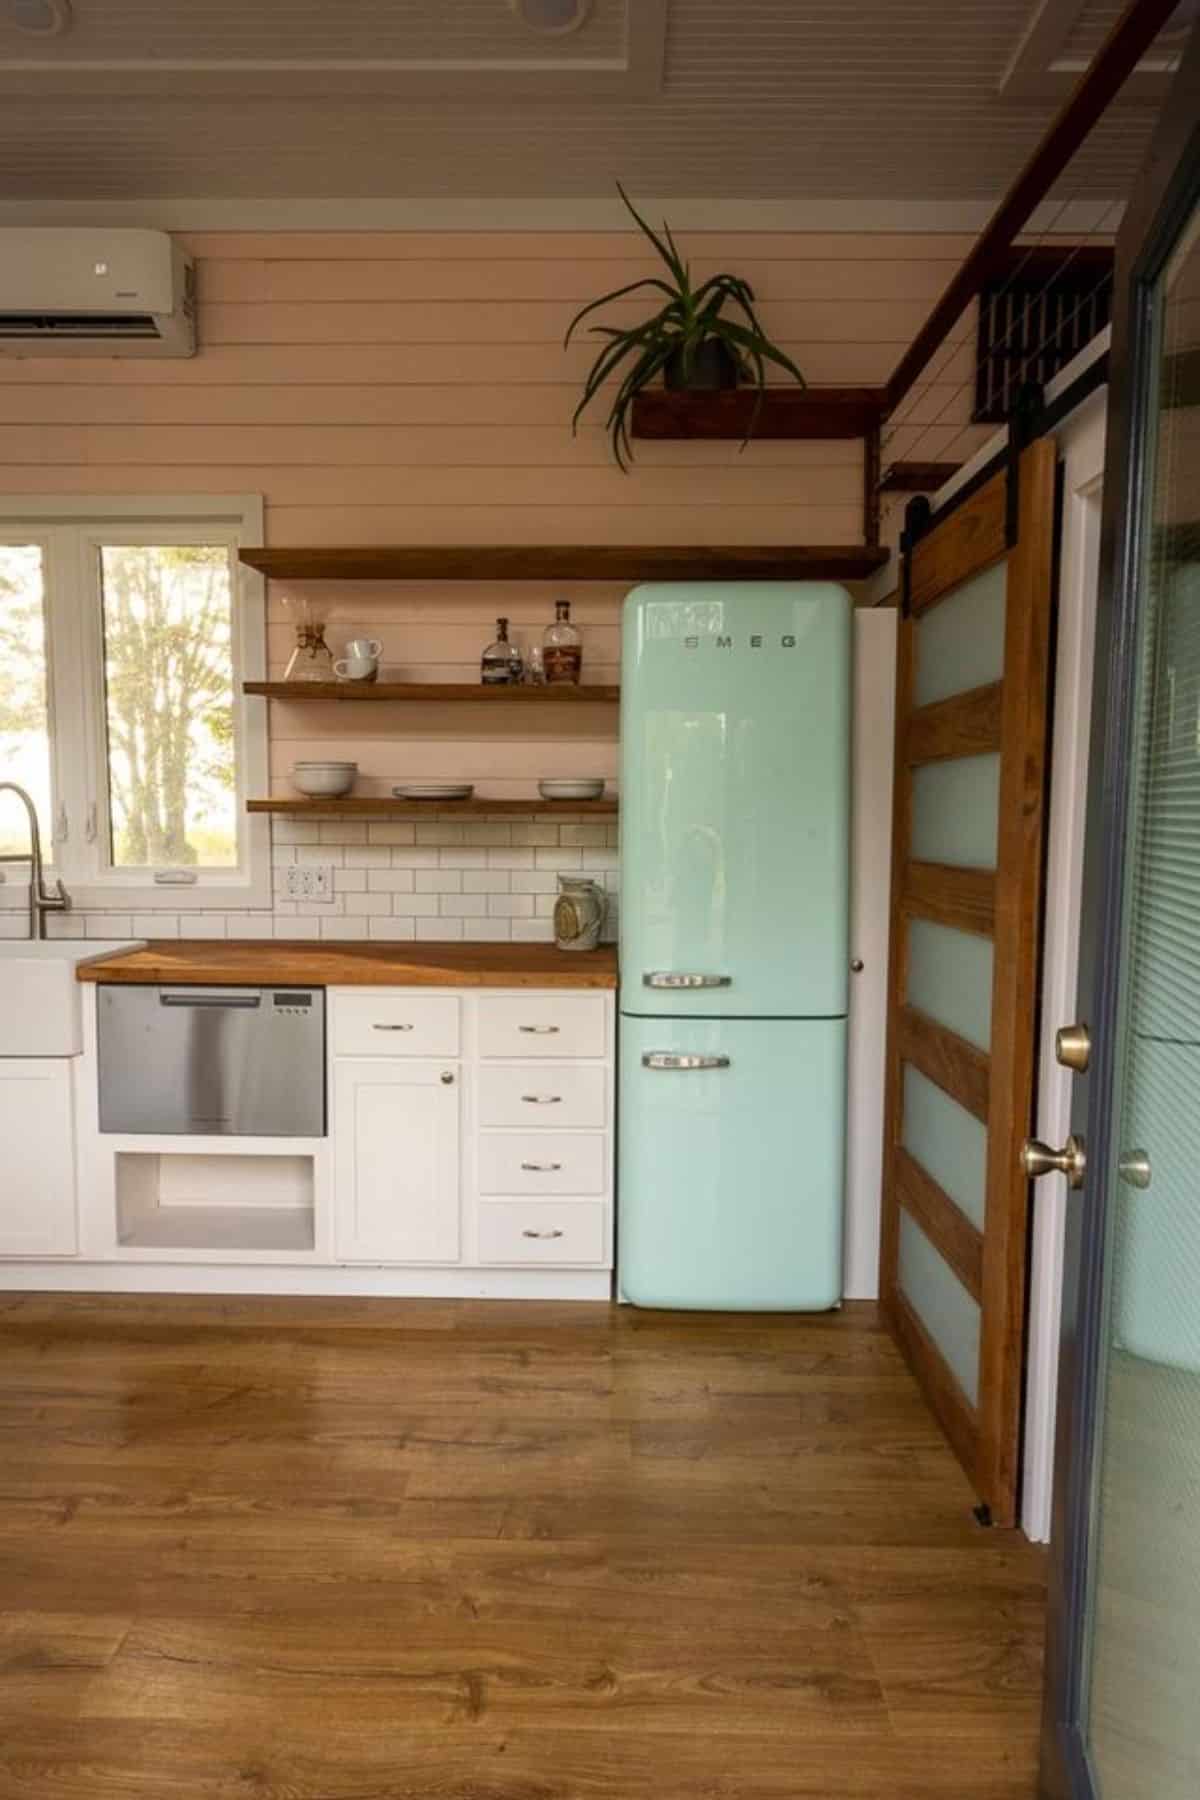 Kitchen area of 280 sf Upscale Tiny House